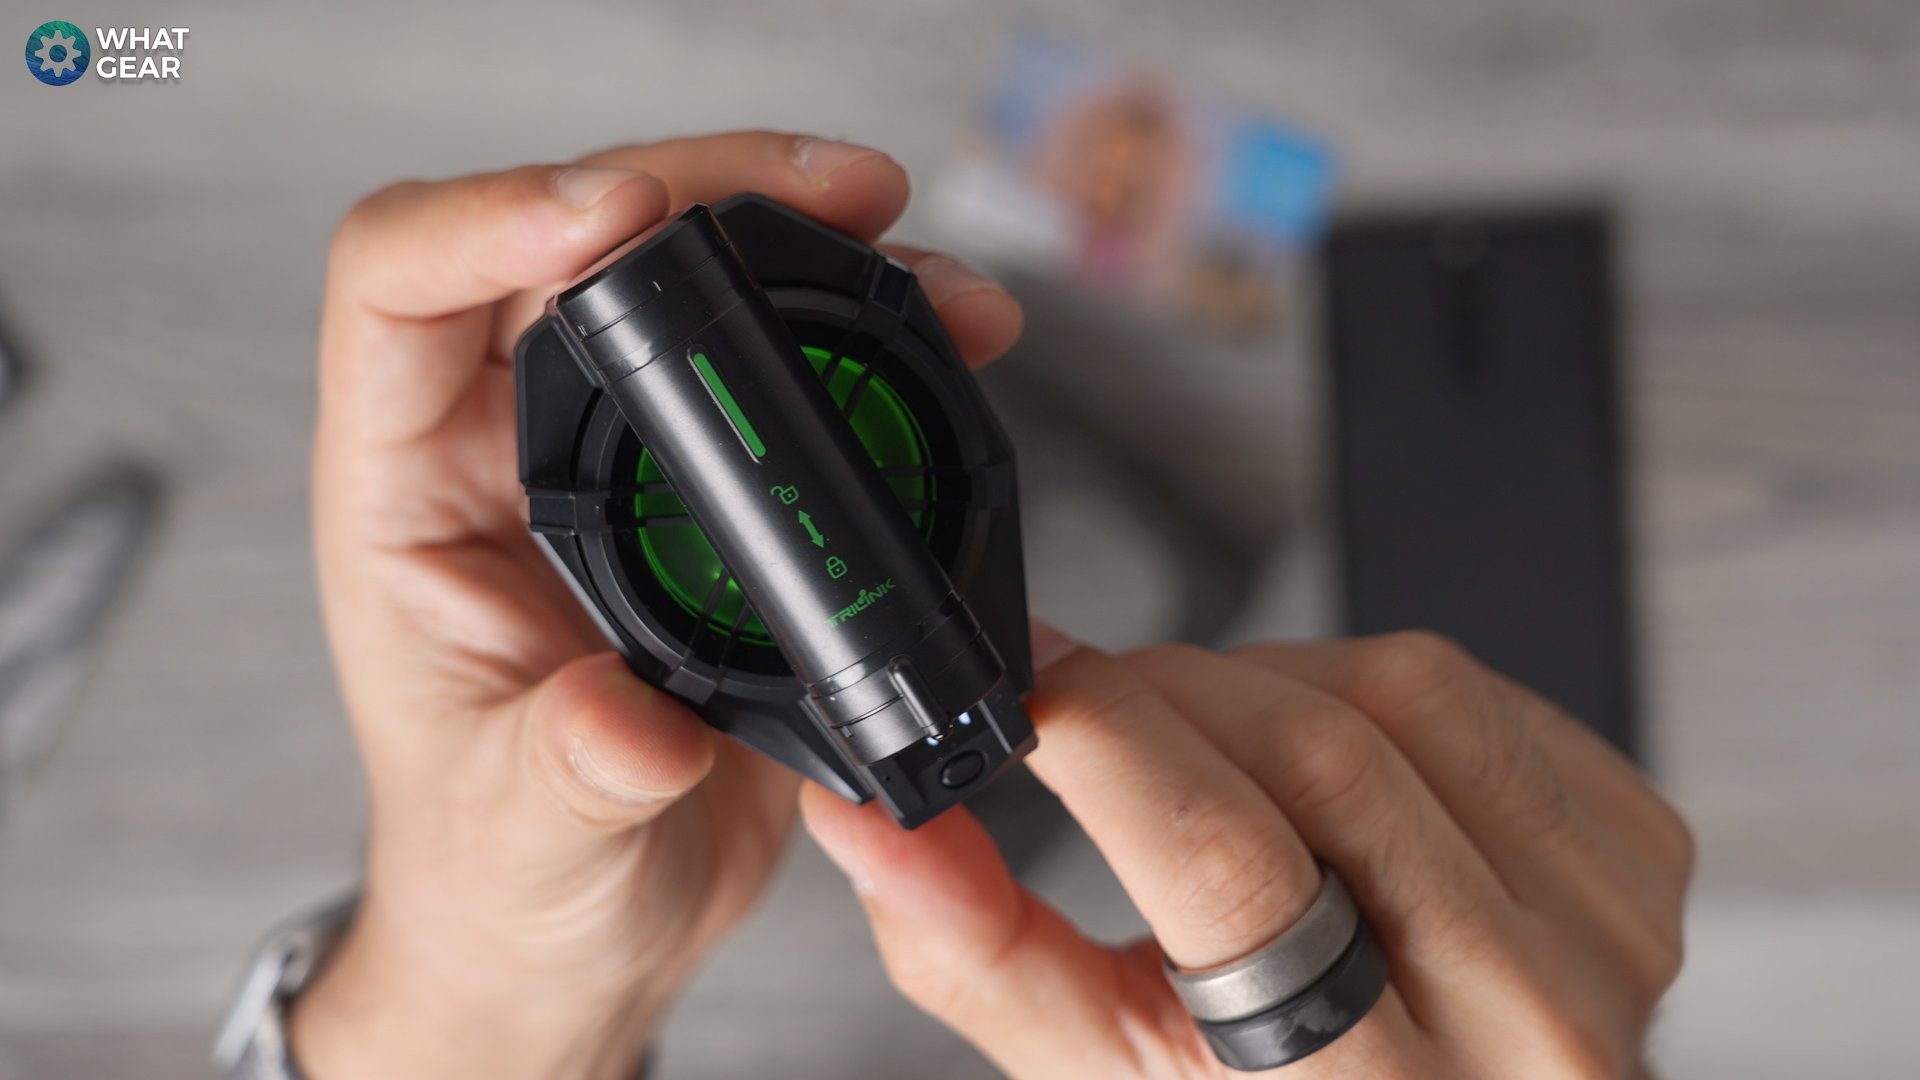 10 Gaming Gadgets That Will Give You The Edge! — WhatGear, Tech Reviews